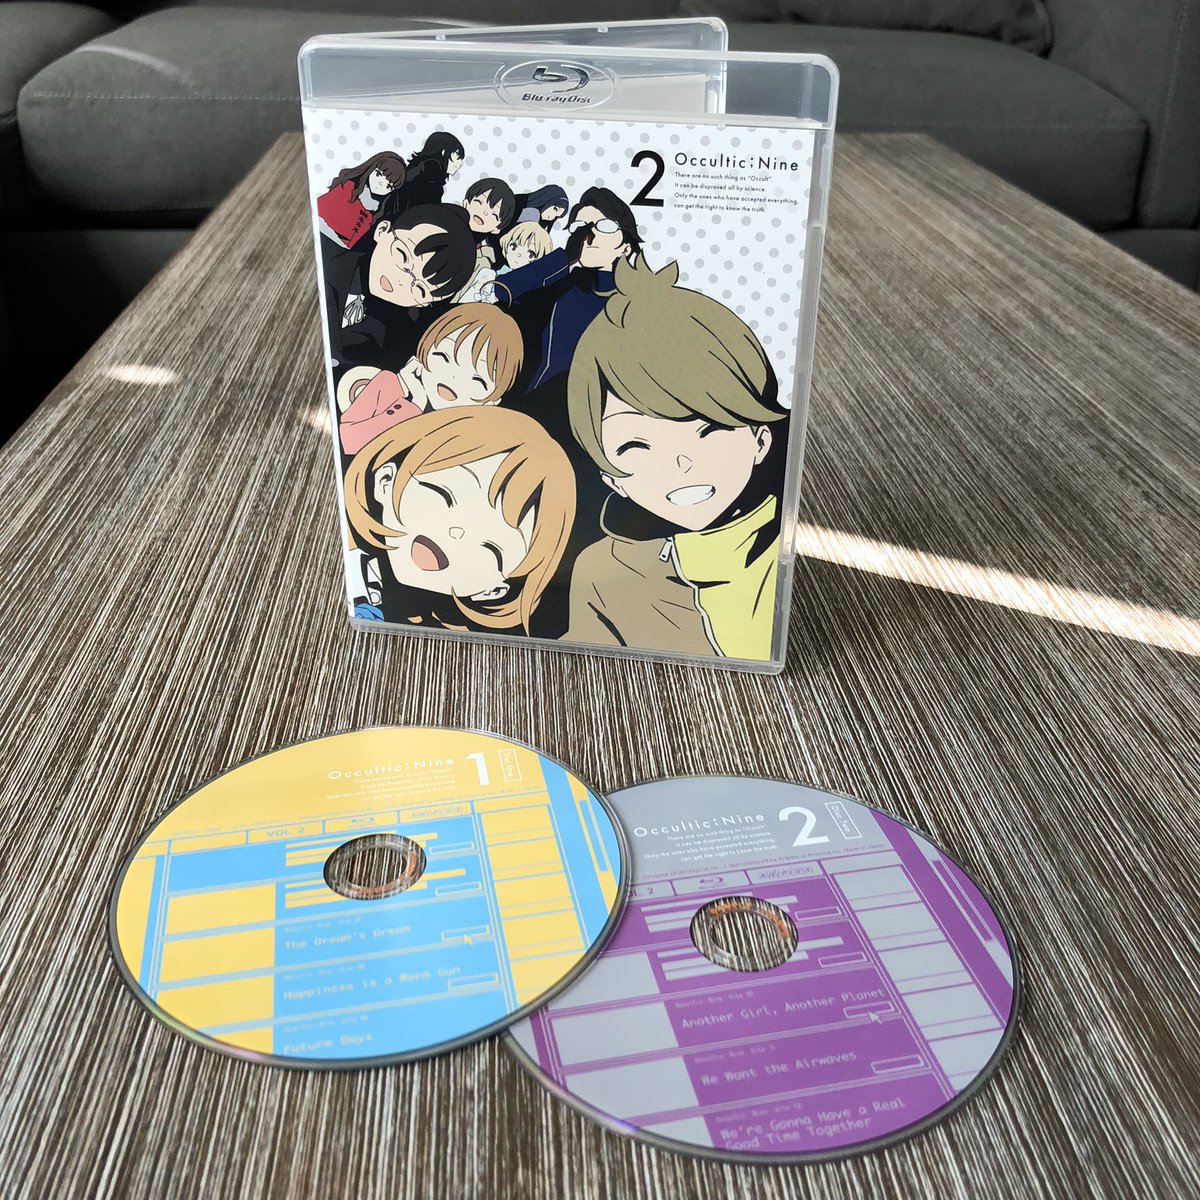 Aniplex Of America Complete Your Occultic Nine Collection With The Release Of Occultic Nine Volume 2 Blu Ray This Blu Ray Comes With Episodes 7 12 Deluxe Booklet And End Card Illustration Pin Up Cards Occultic Nine